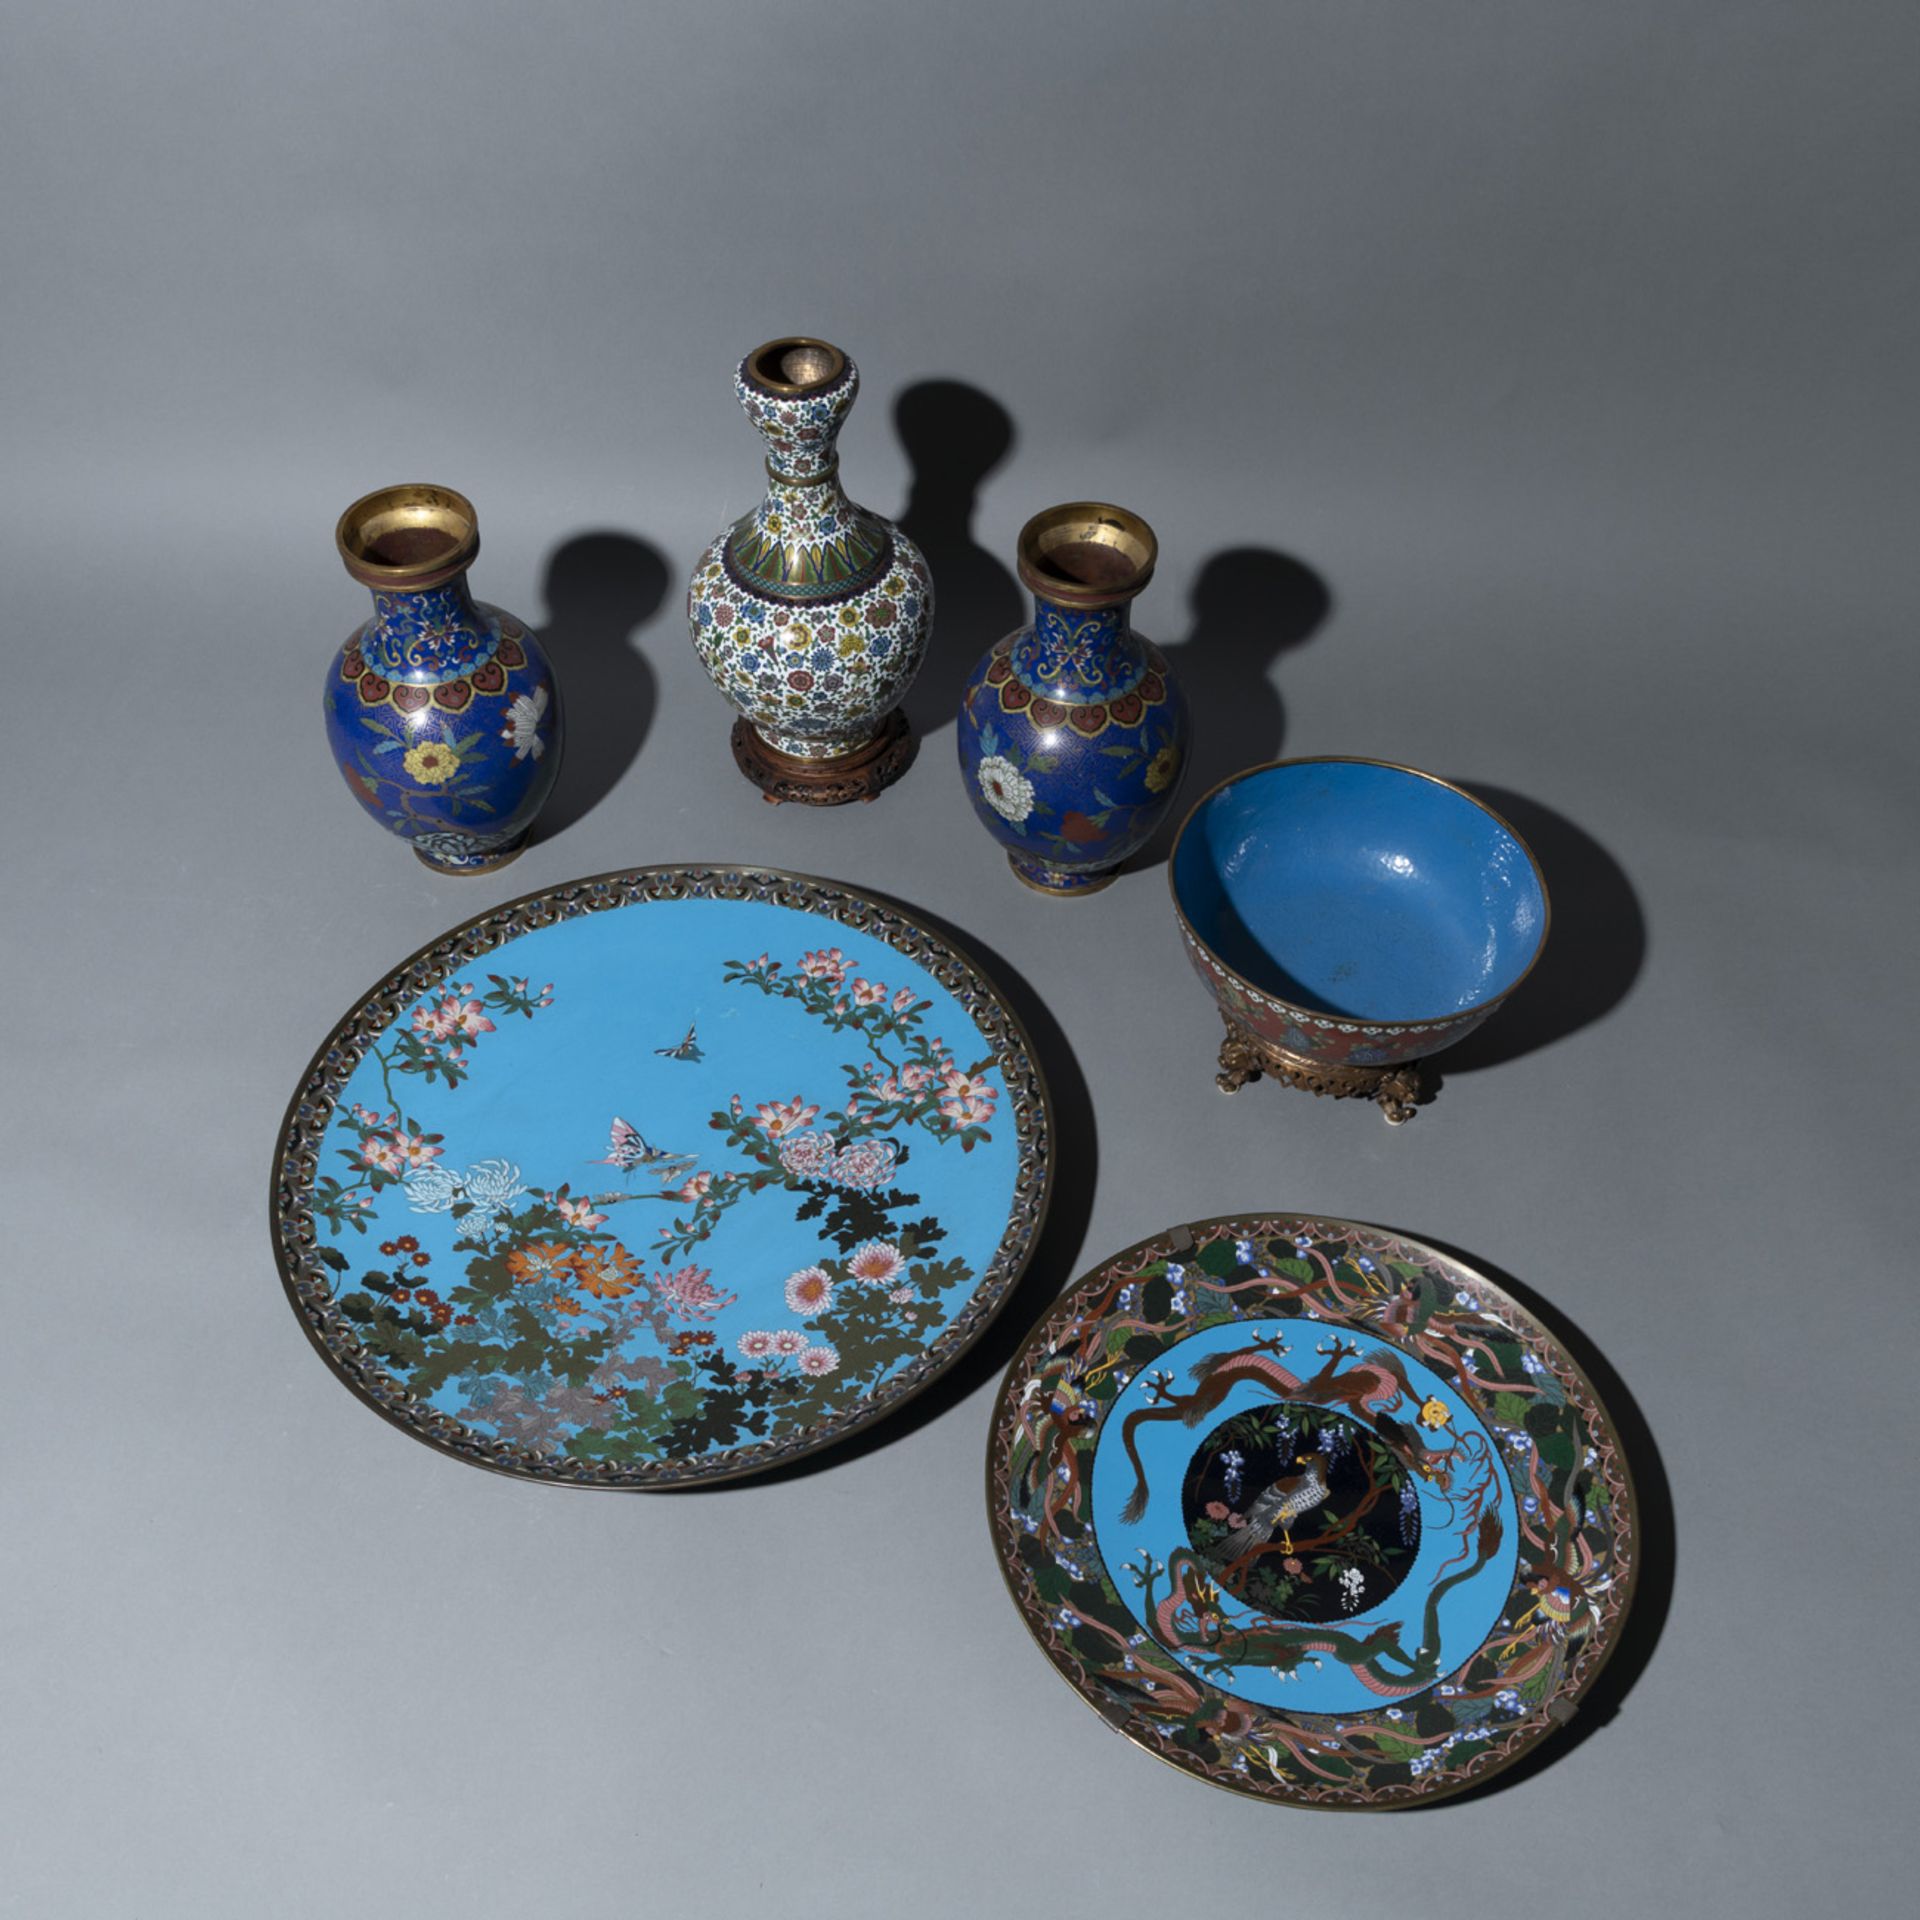 LOT OF CLOISONNÉ OBJECTS WITH DRAGON AND FLOWERS DECORATION: TWO LARGE PLATES, A PAIR OF VASES, A L - Image 2 of 3